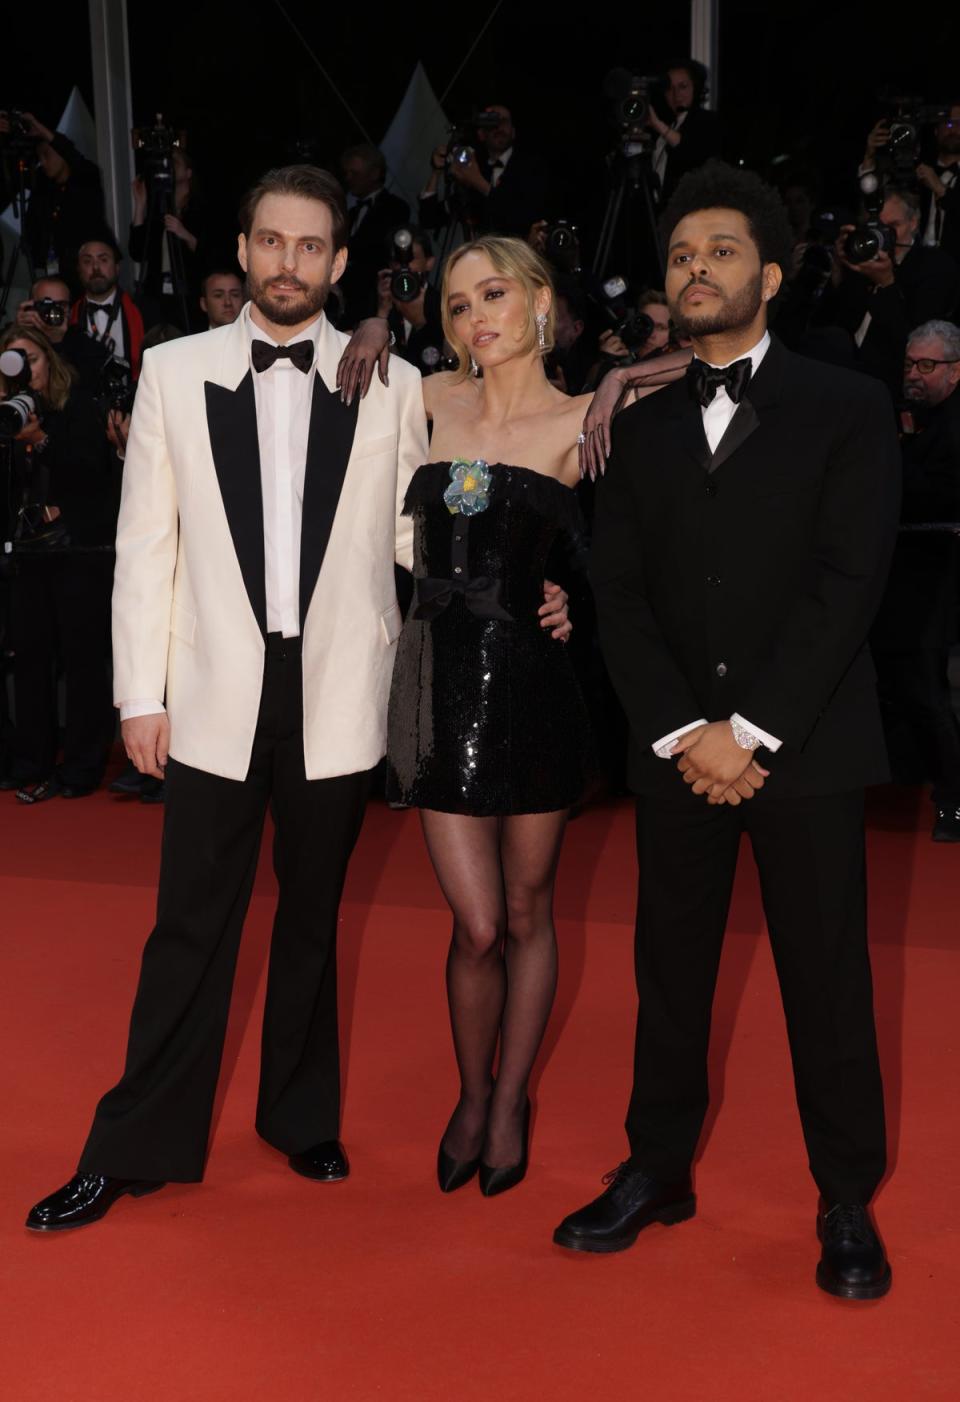 Sam Levinson, Lily-Rose Depp and The Weeknd (Getty Images)